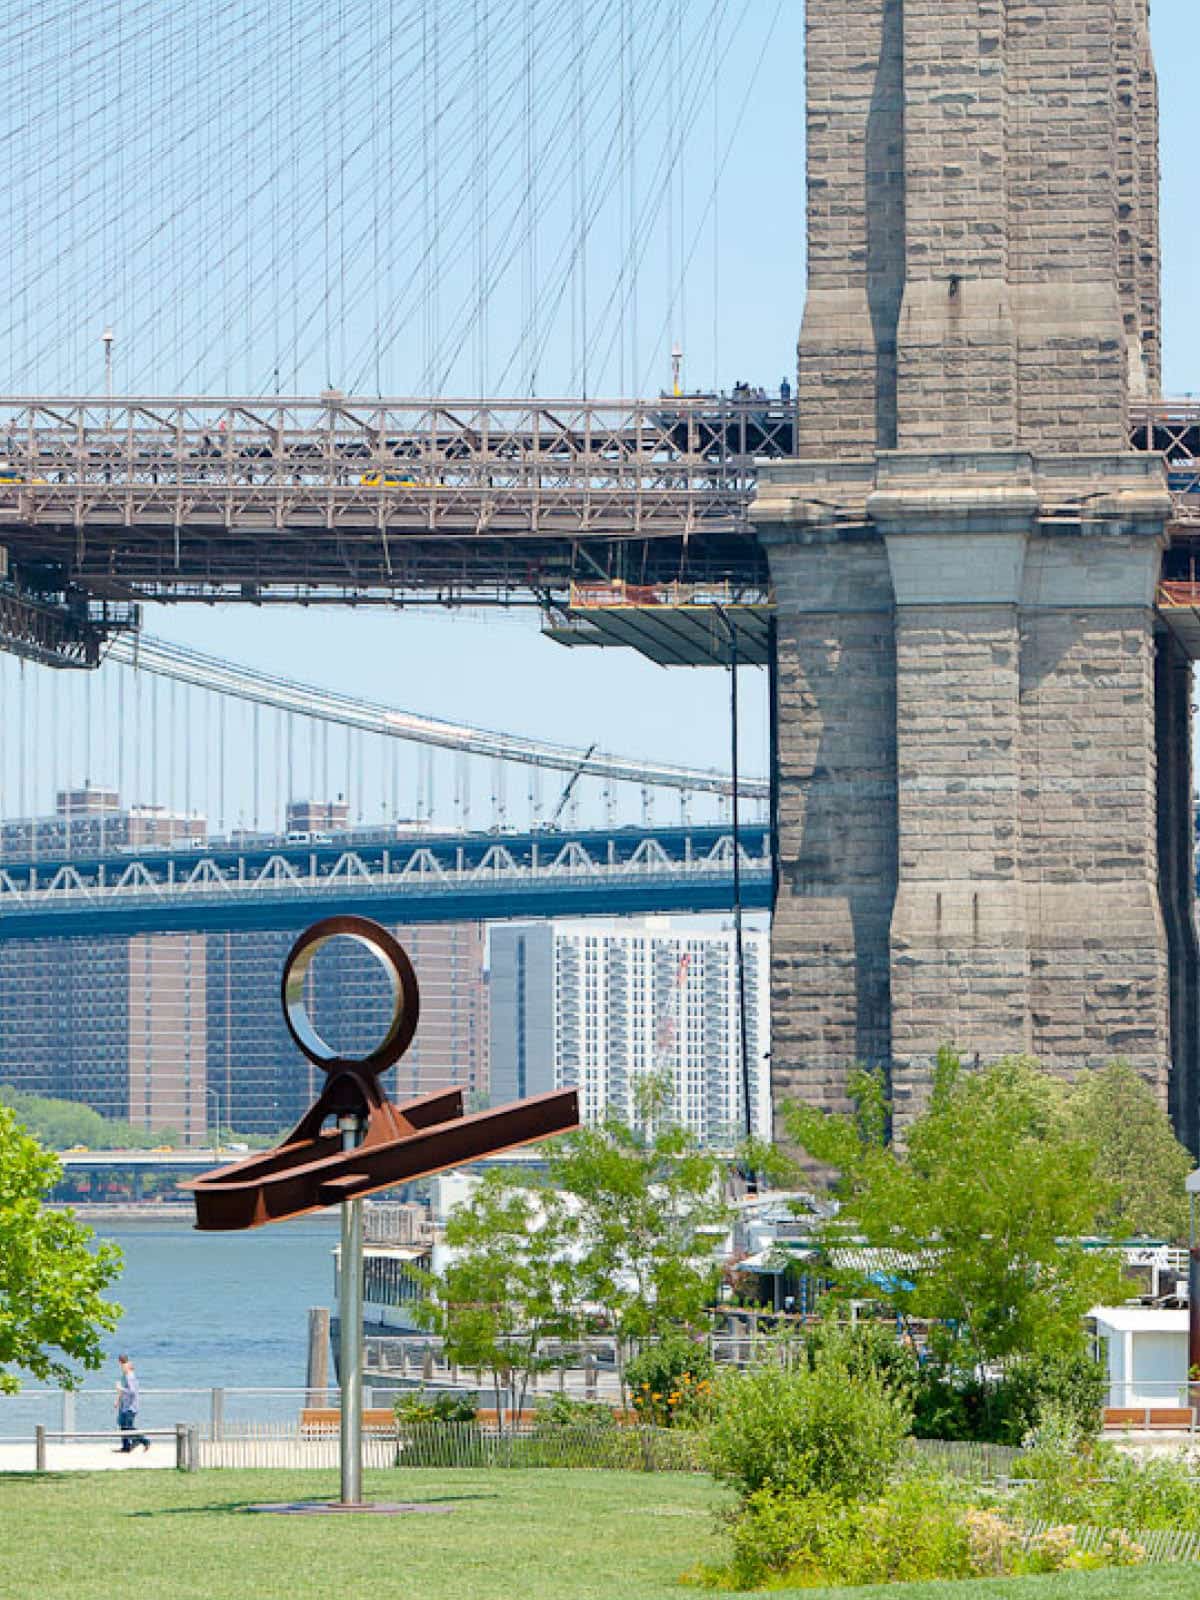 Yoga by Mark di Suvero on Pier 1 Lawn on a sunny day. The Brooklyn Bridge is seen in the background.